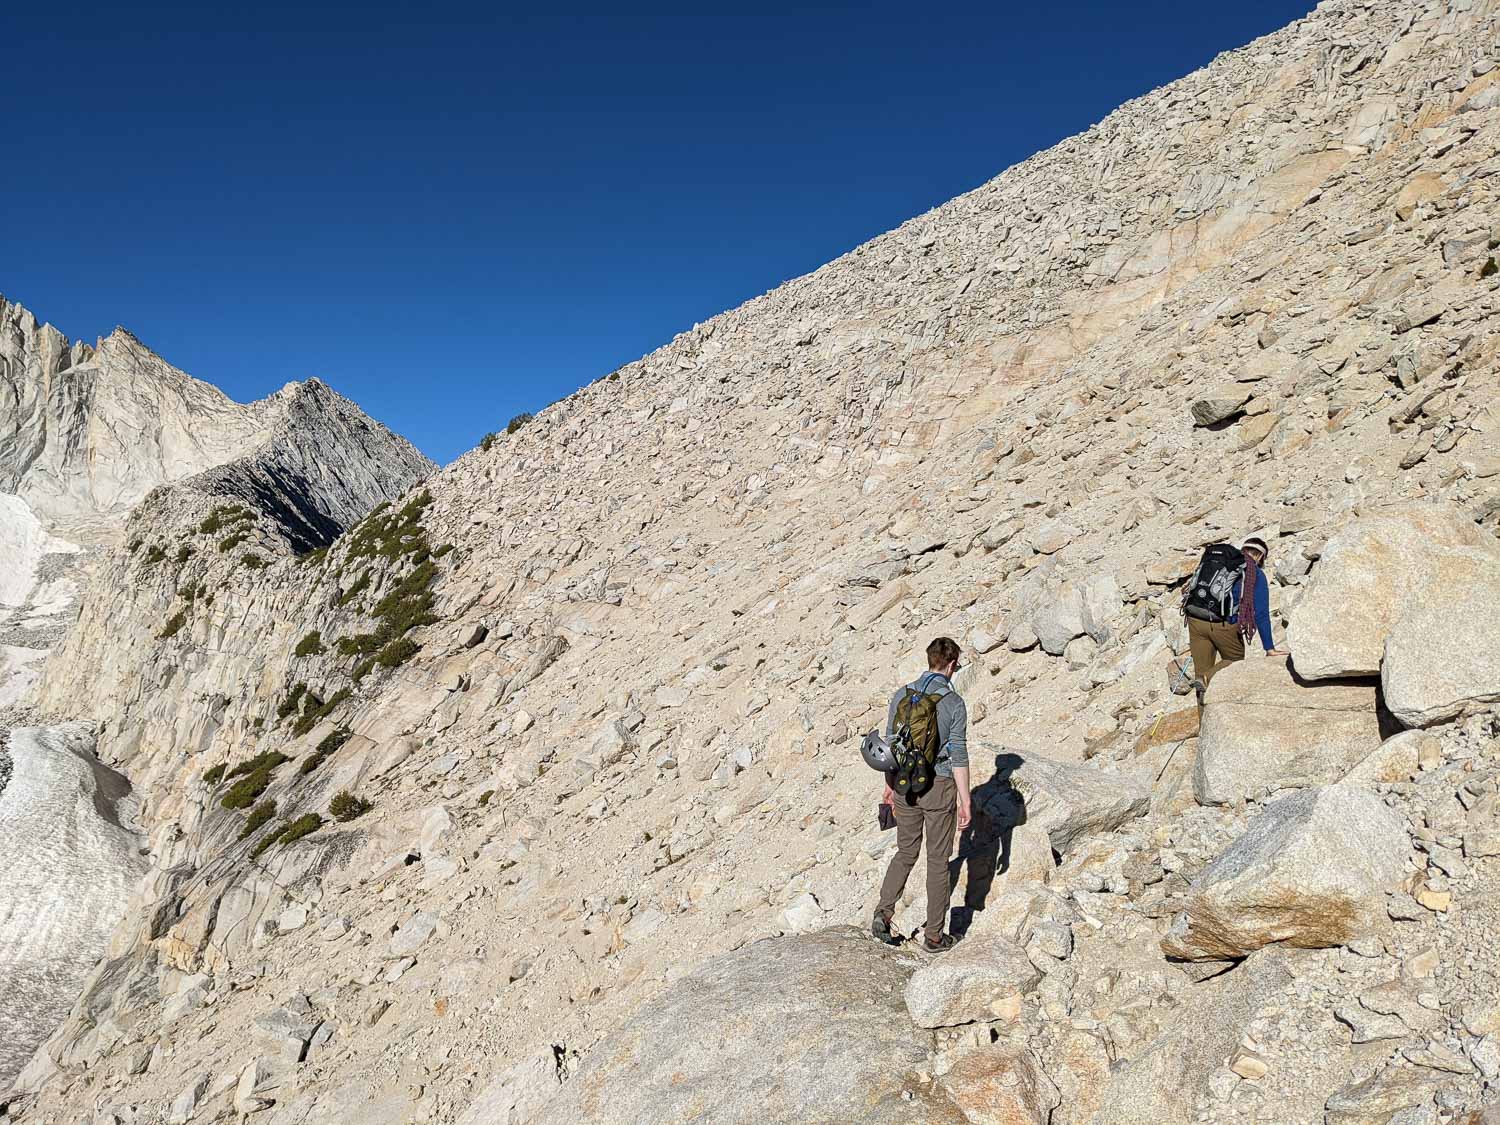 Gaining the North Ridge of Mount Conness